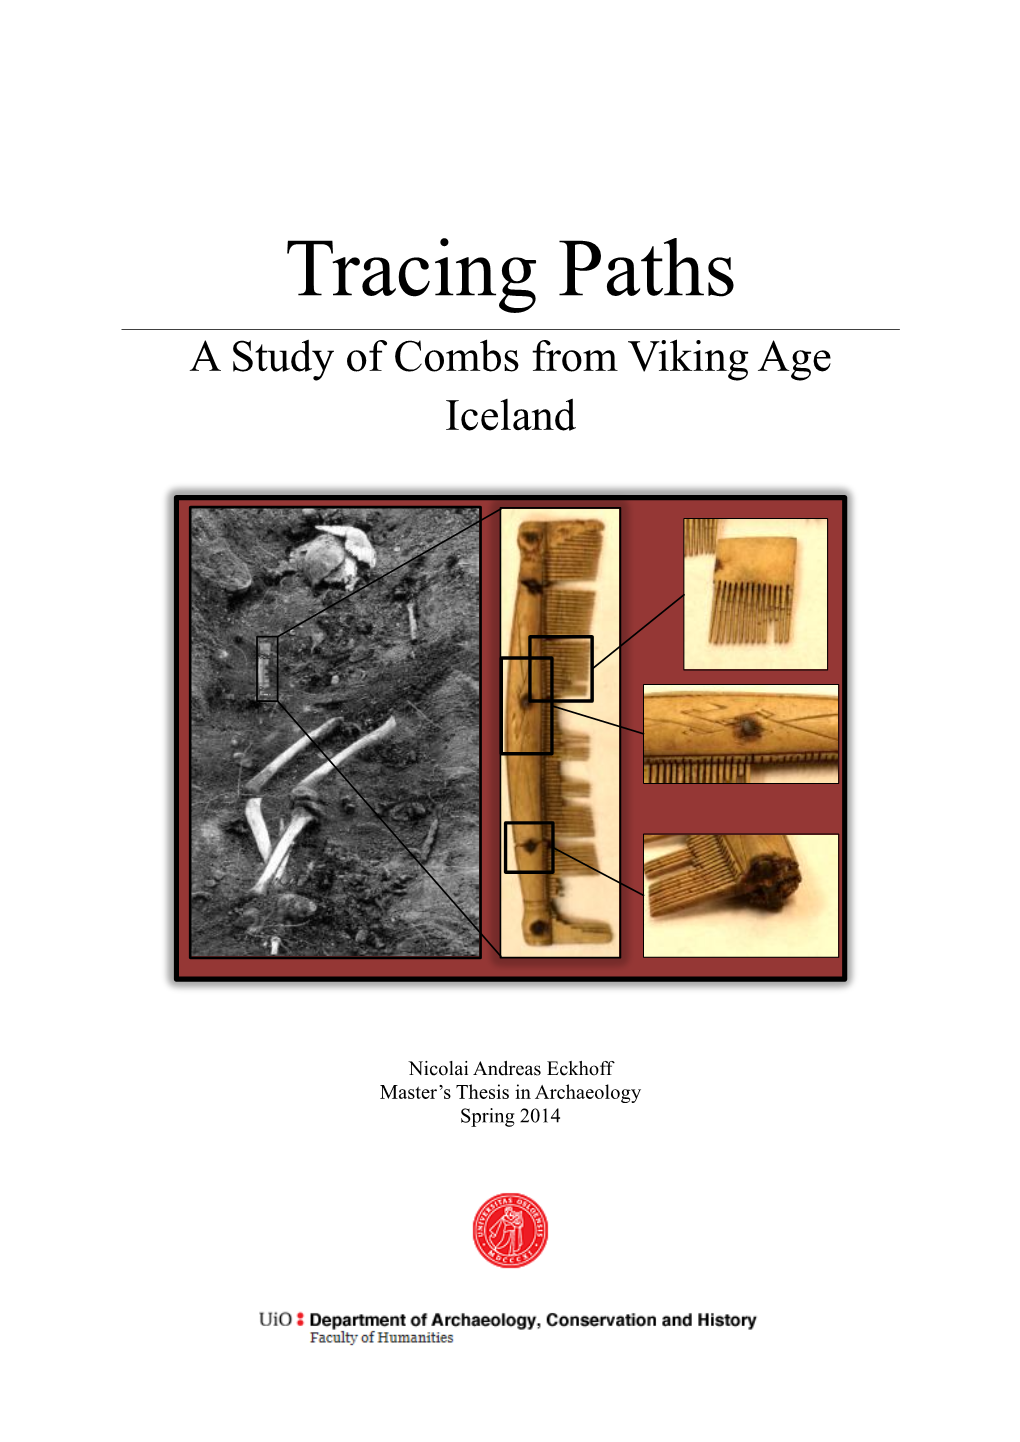 Tracing Paths a Study of Combs from Viking Age Iceland